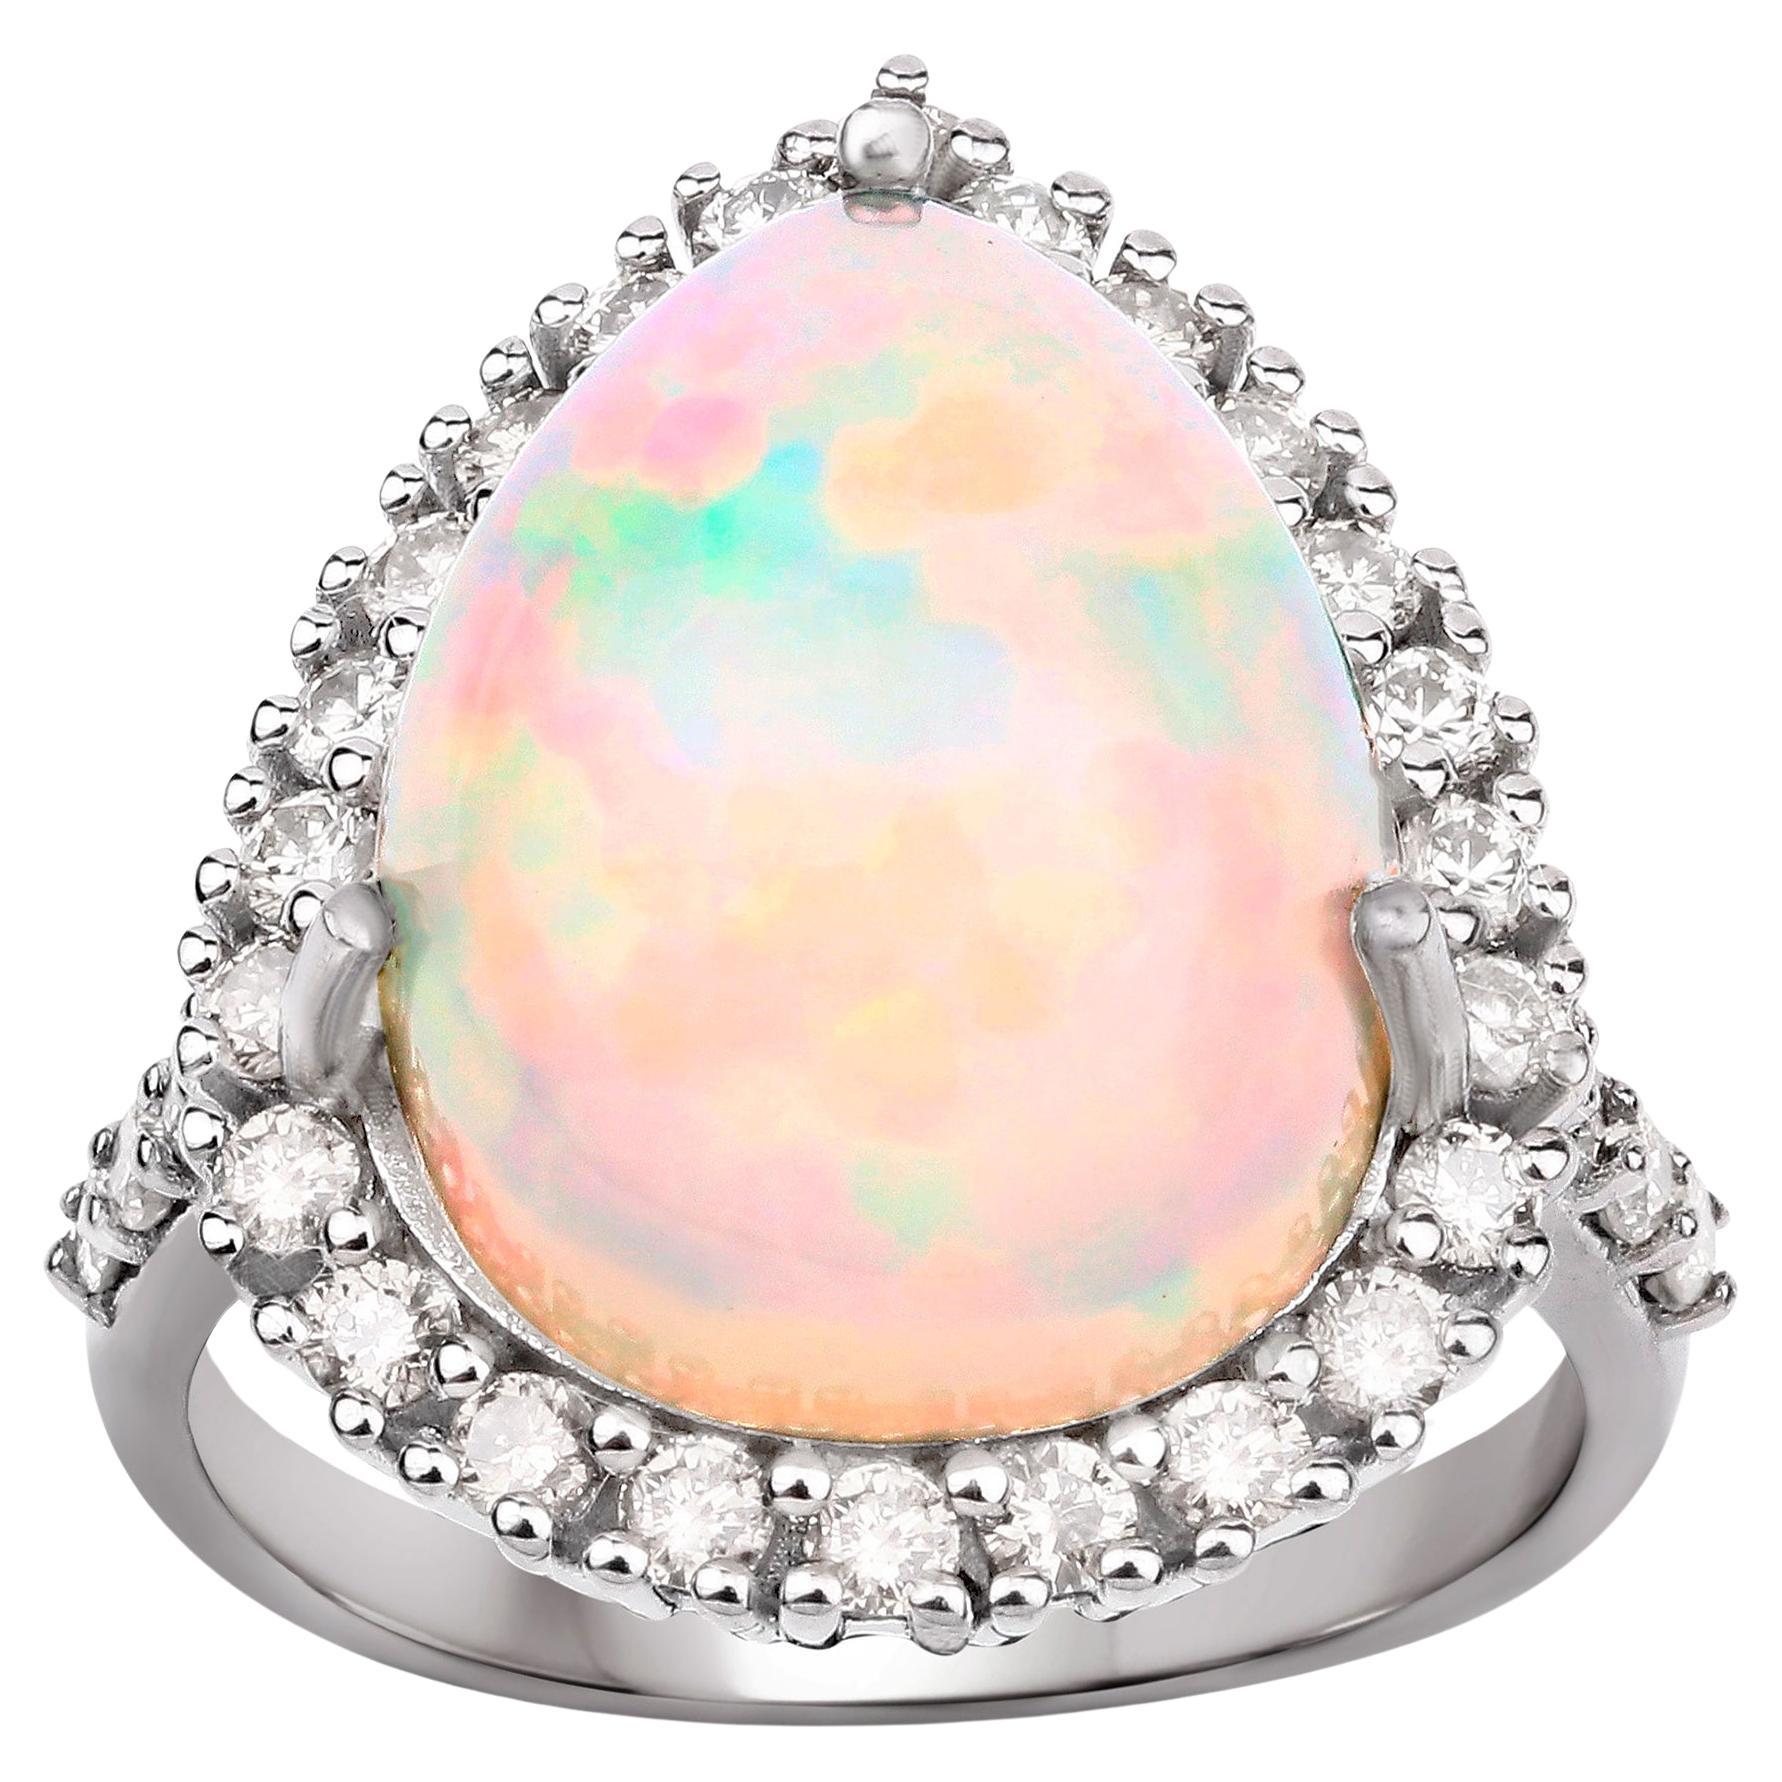 Opal Ring With Diamonds 10.27 Carats Rhodium Plated Sterling Silver For Sale